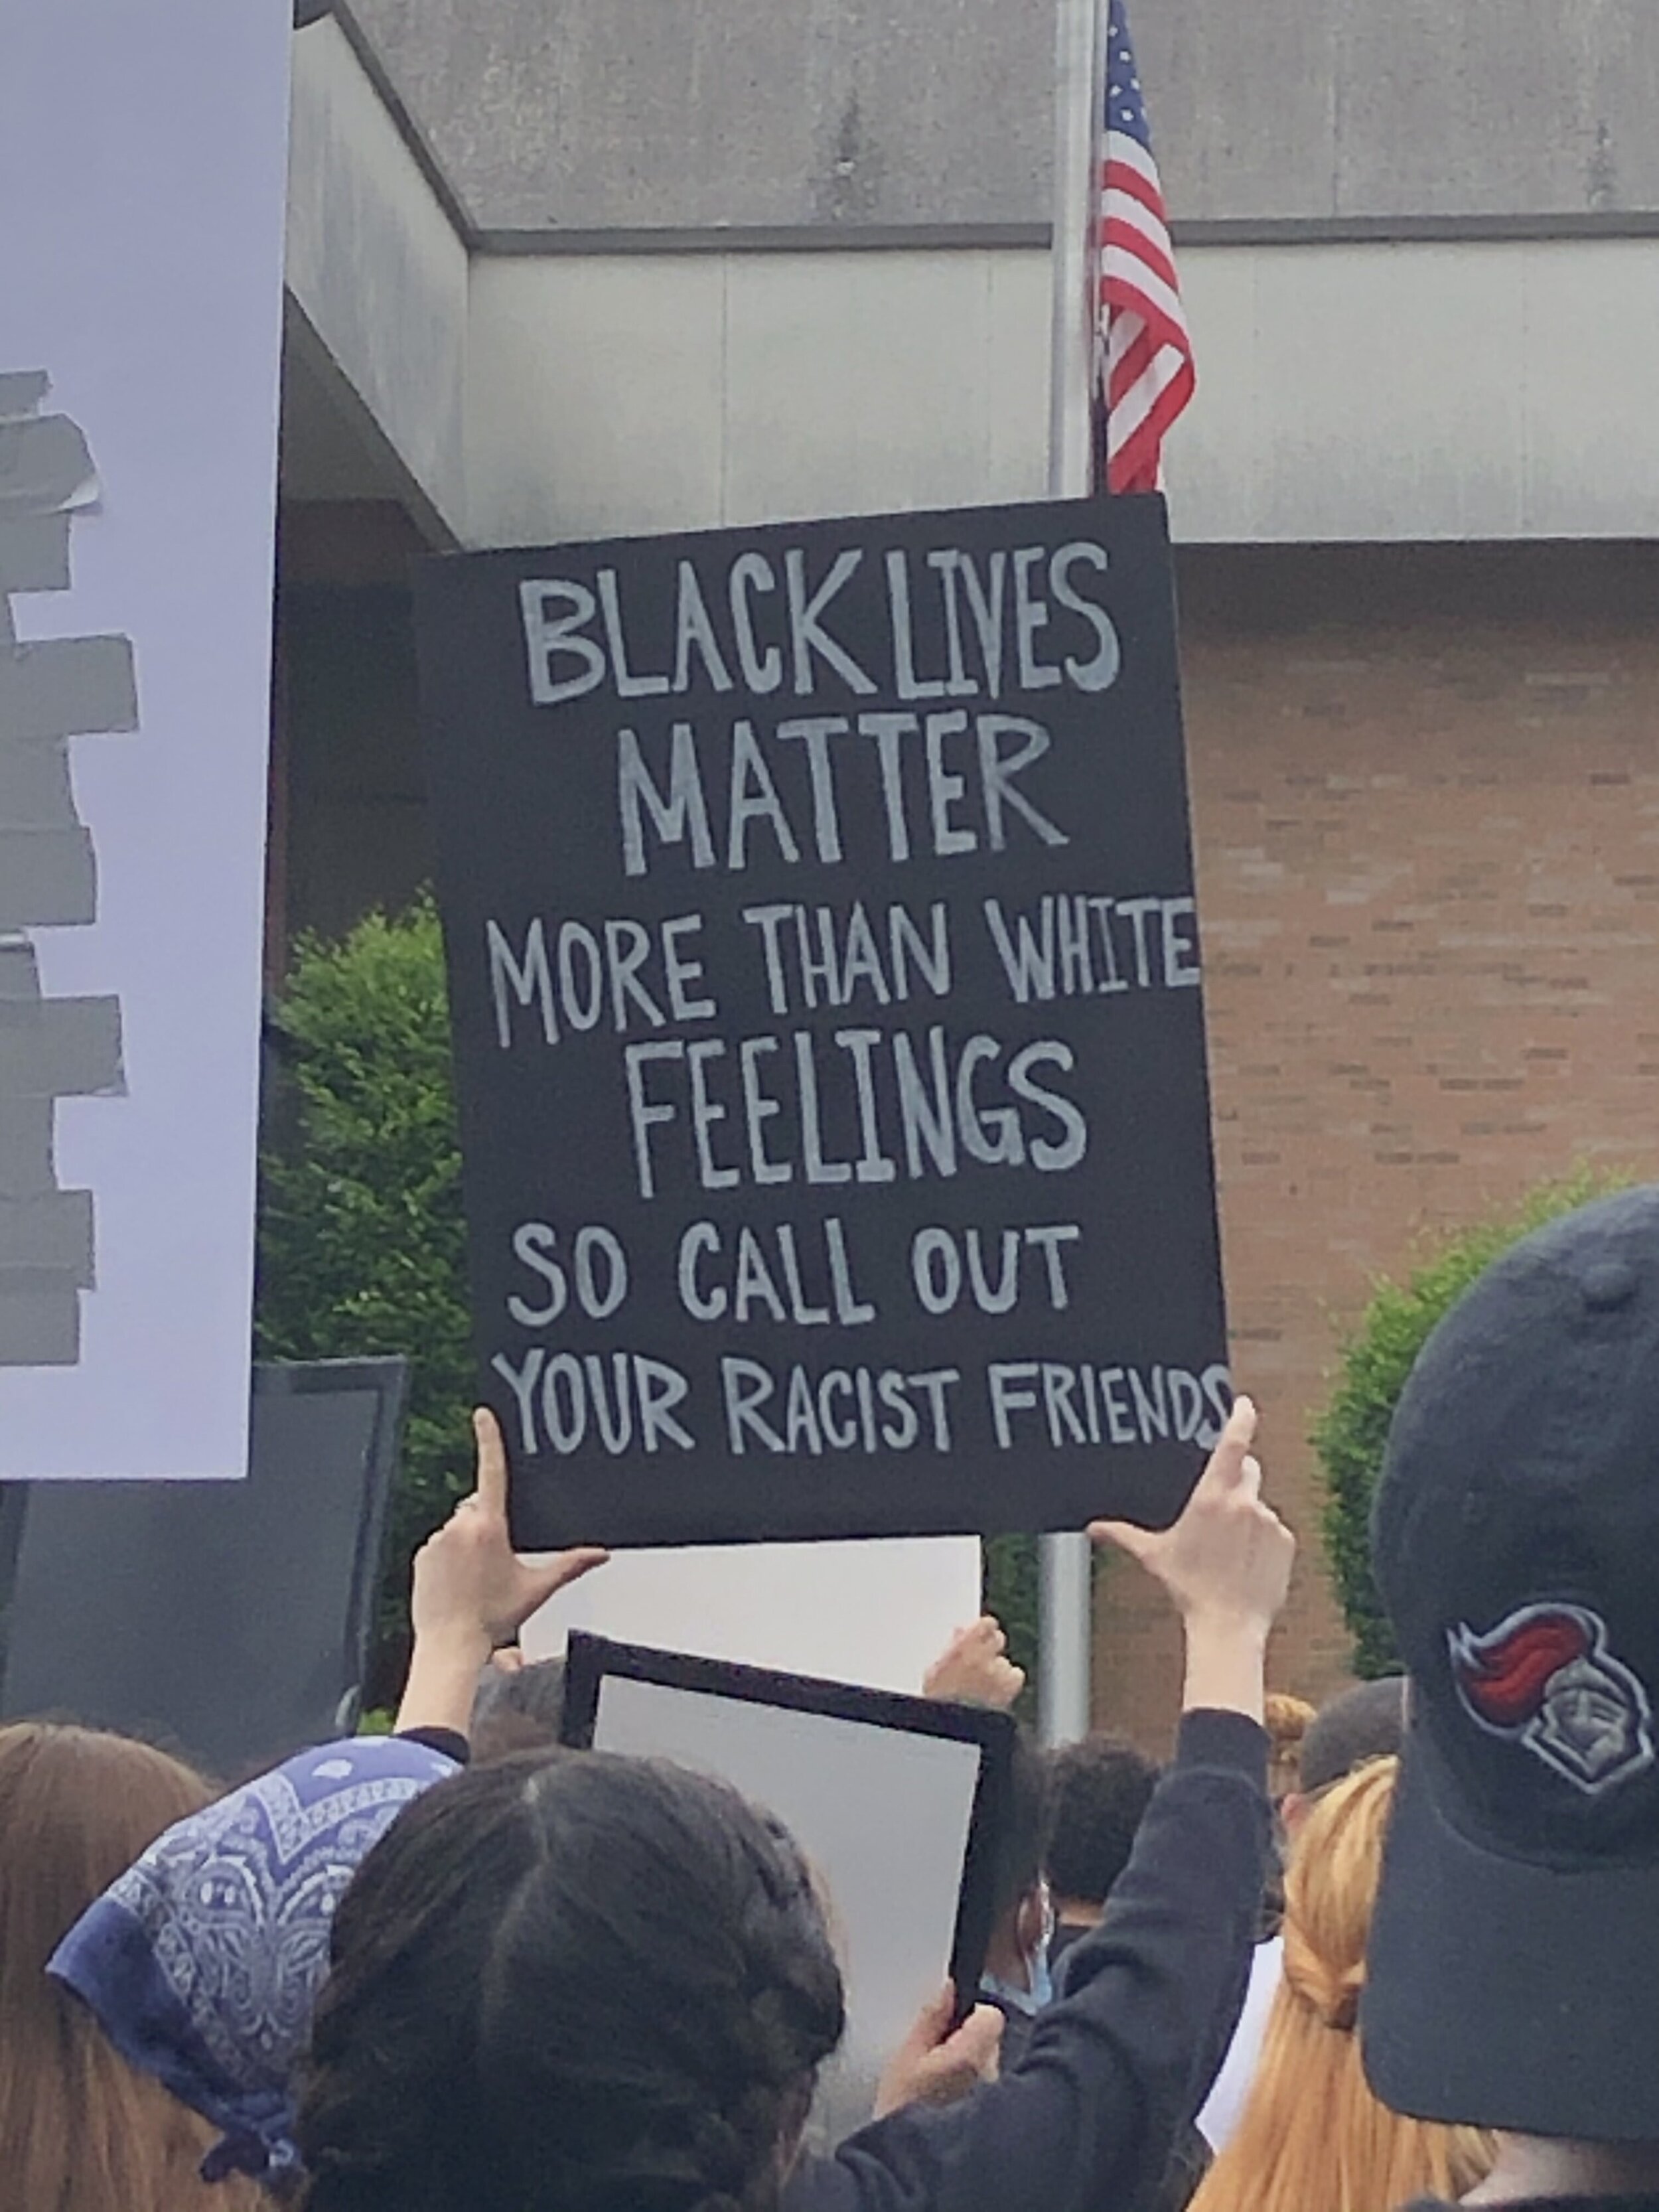  A protestor holds a Black Lives Matter sign during a rally in Clifton, New Jersey on Tuesday, June 2, 2020.  Photo by: Gab Varano  